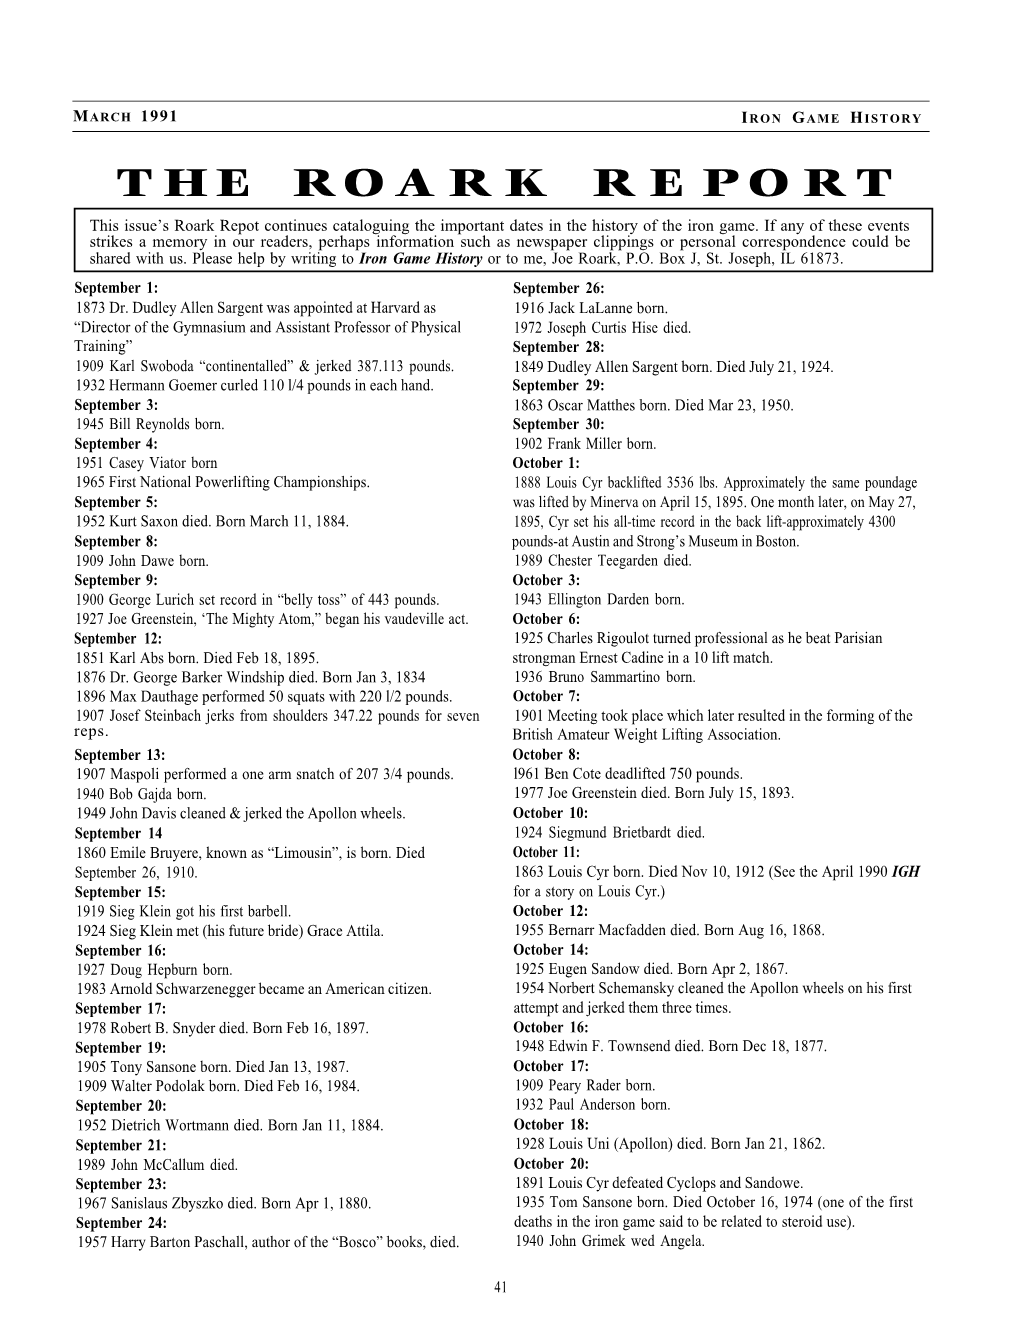 The Roark Report – Important Dates in Iron Game History